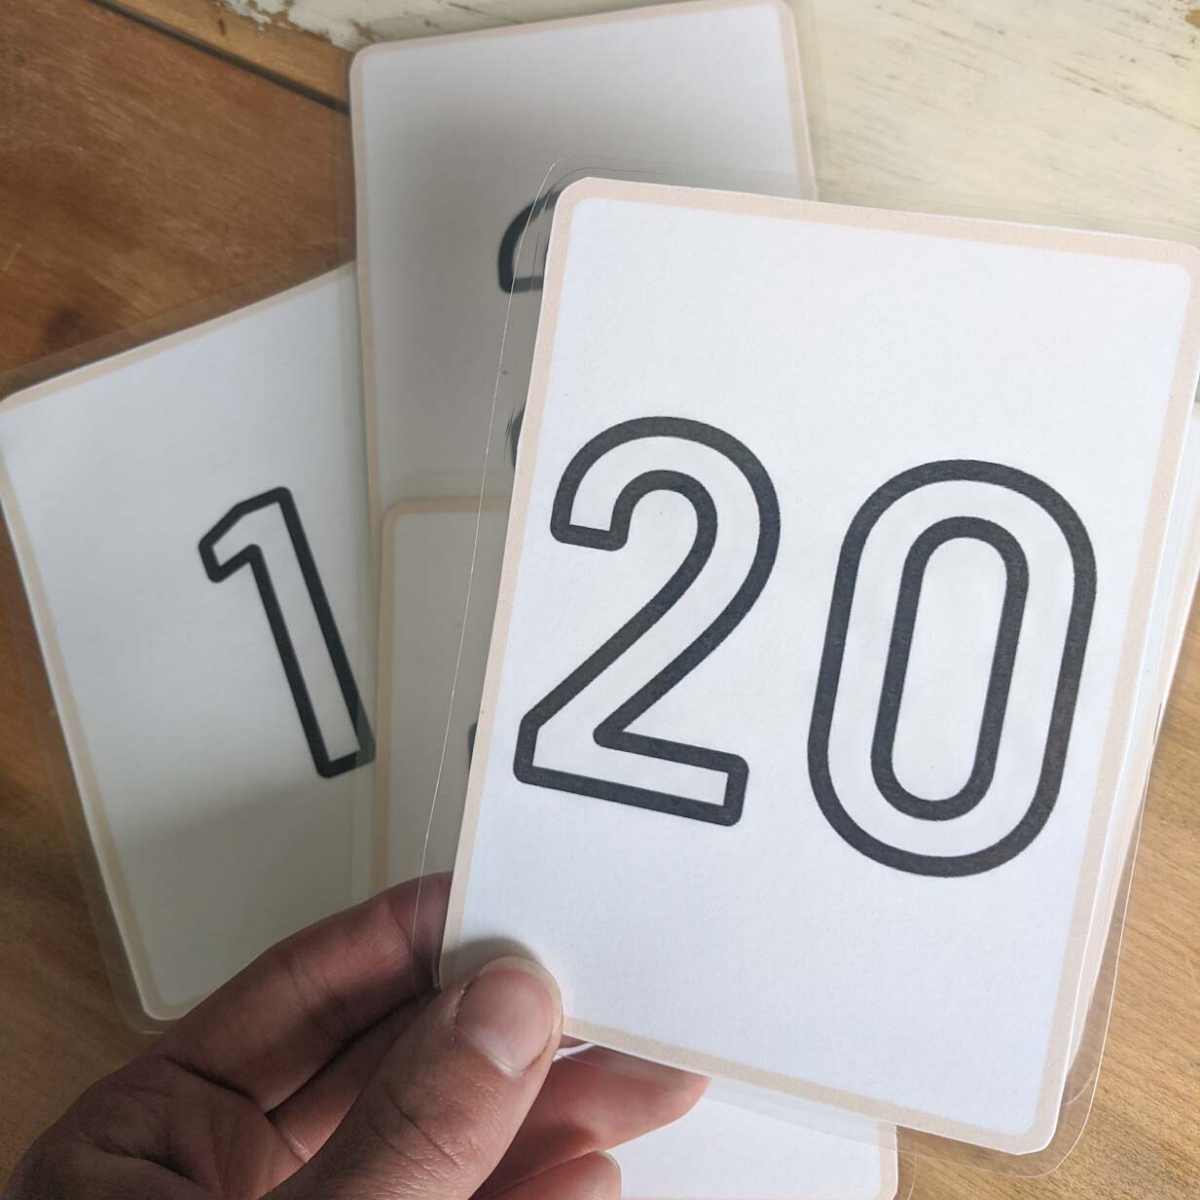 Number flashcards